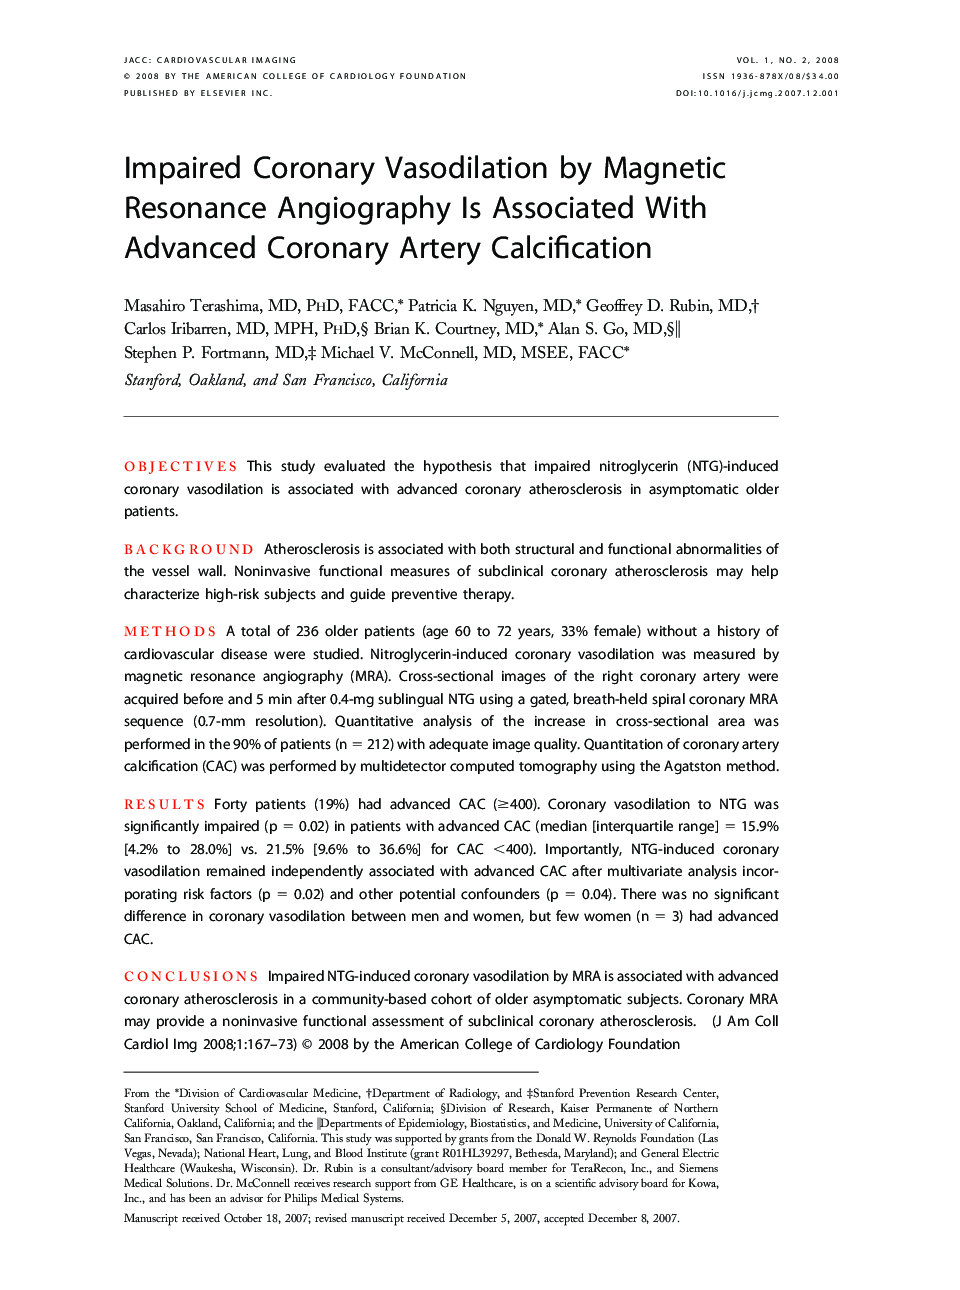 Impaired Coronary Vasodilation by Magnetic Resonance Angiography Is Associated With Advanced Coronary Artery Calcification 